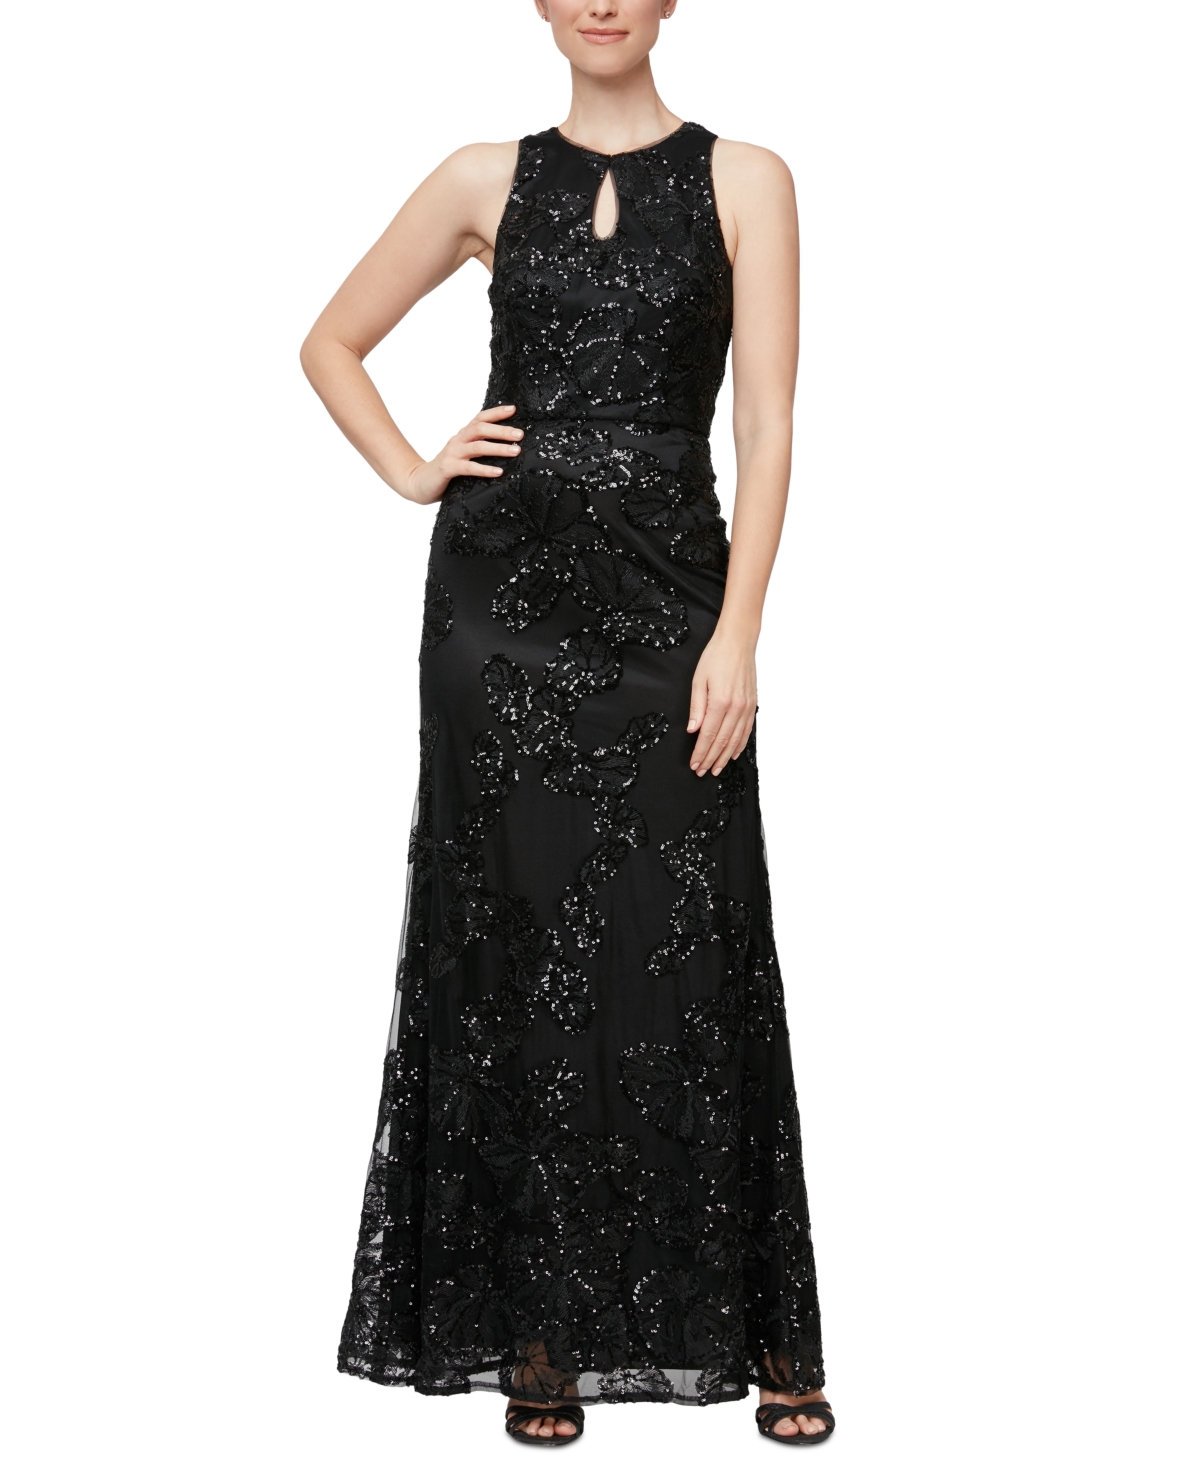 ALEX & EVE WOMEN'S FLORAL-SEQUIN SLEEVELESS KEYHOLE GOWN